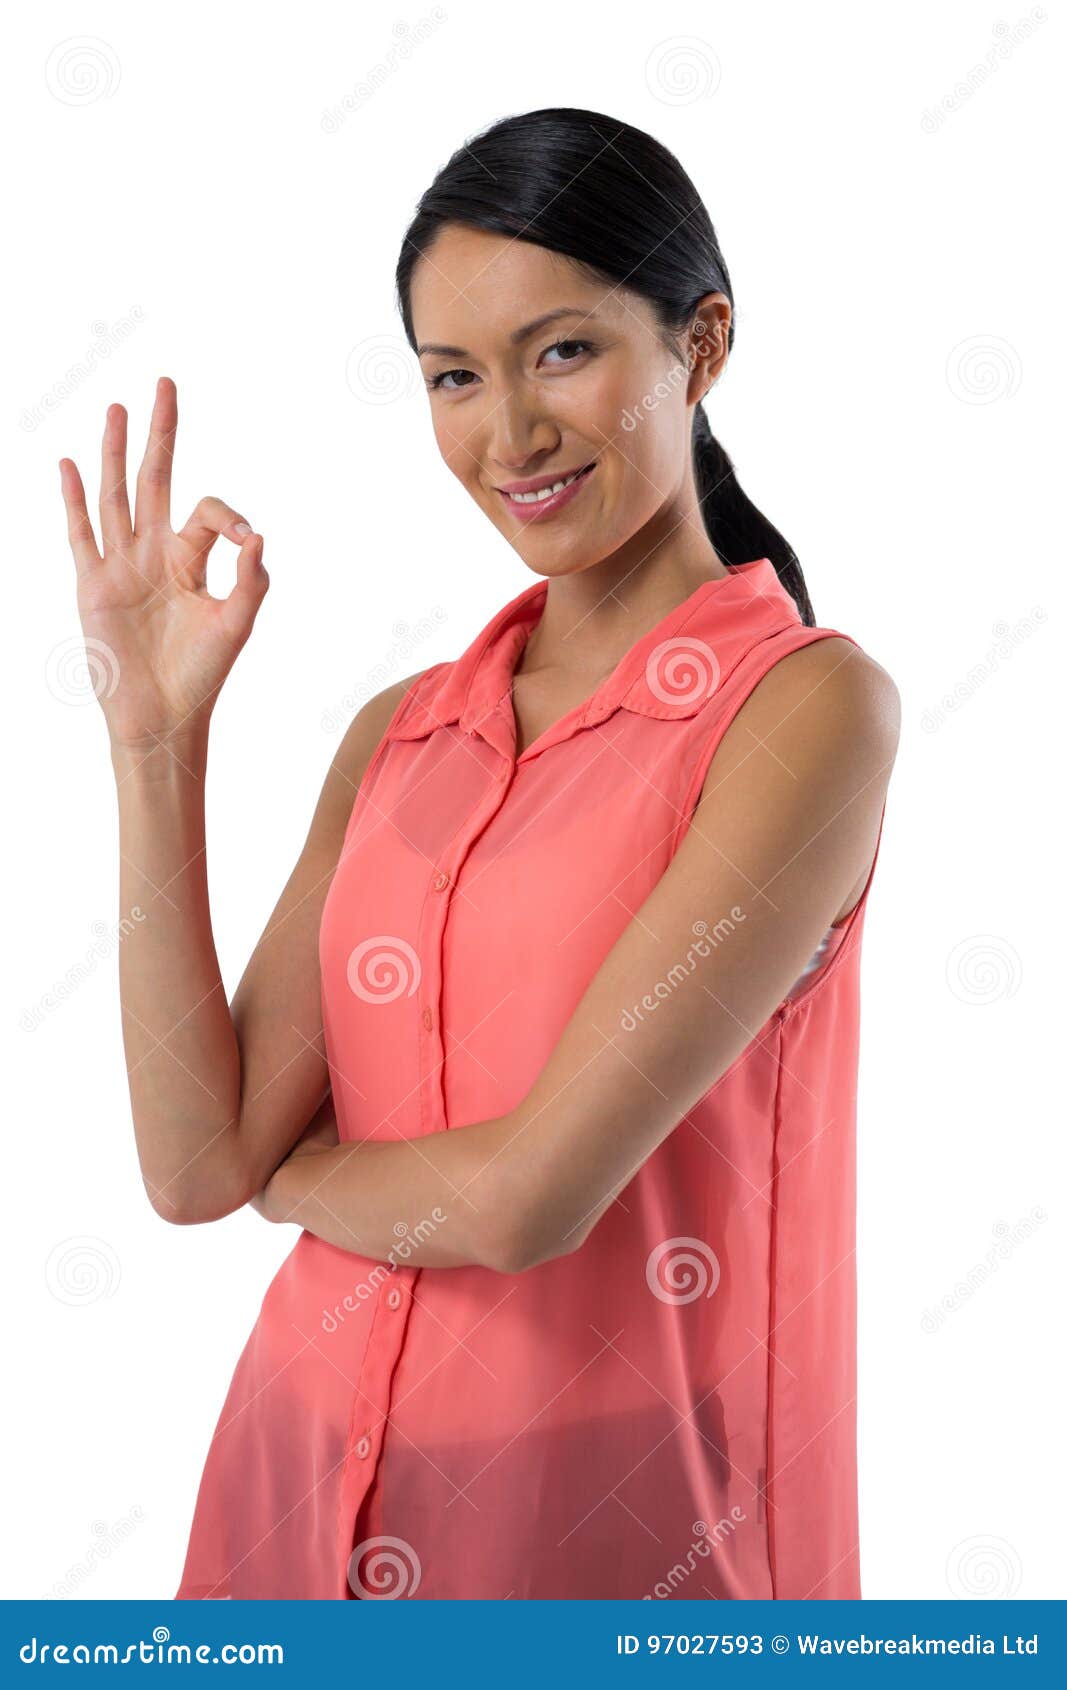 Smiling Woman Gesturing Okay Hand Sign Against White Background Stock ...